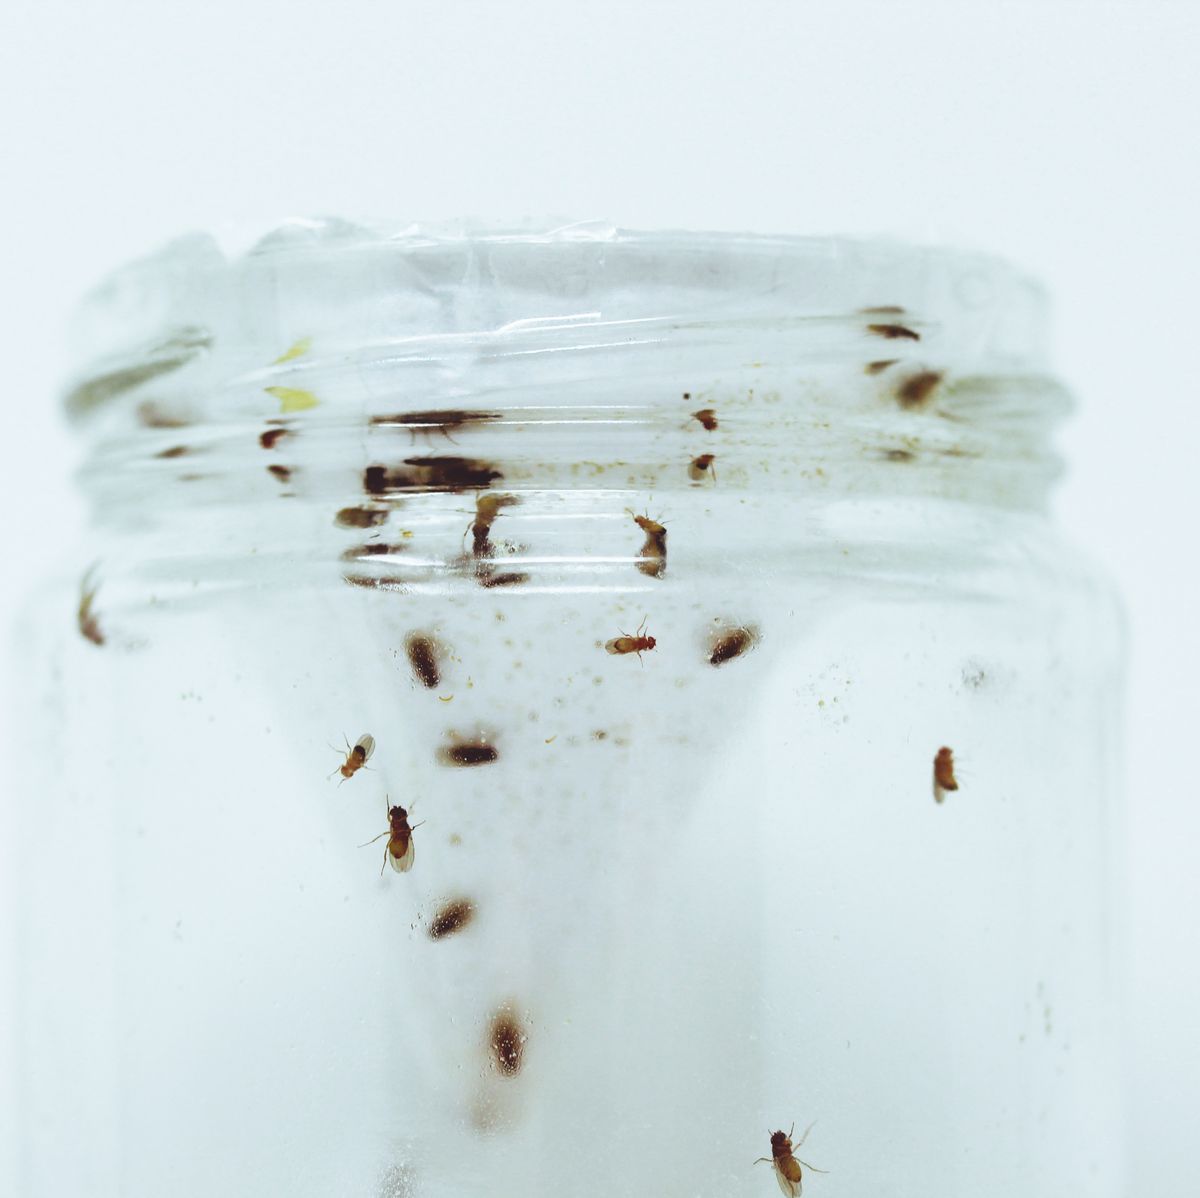 How to Get Rid of Fruit Flies: 5 Tips to Kill & Prevent Fruit Flies